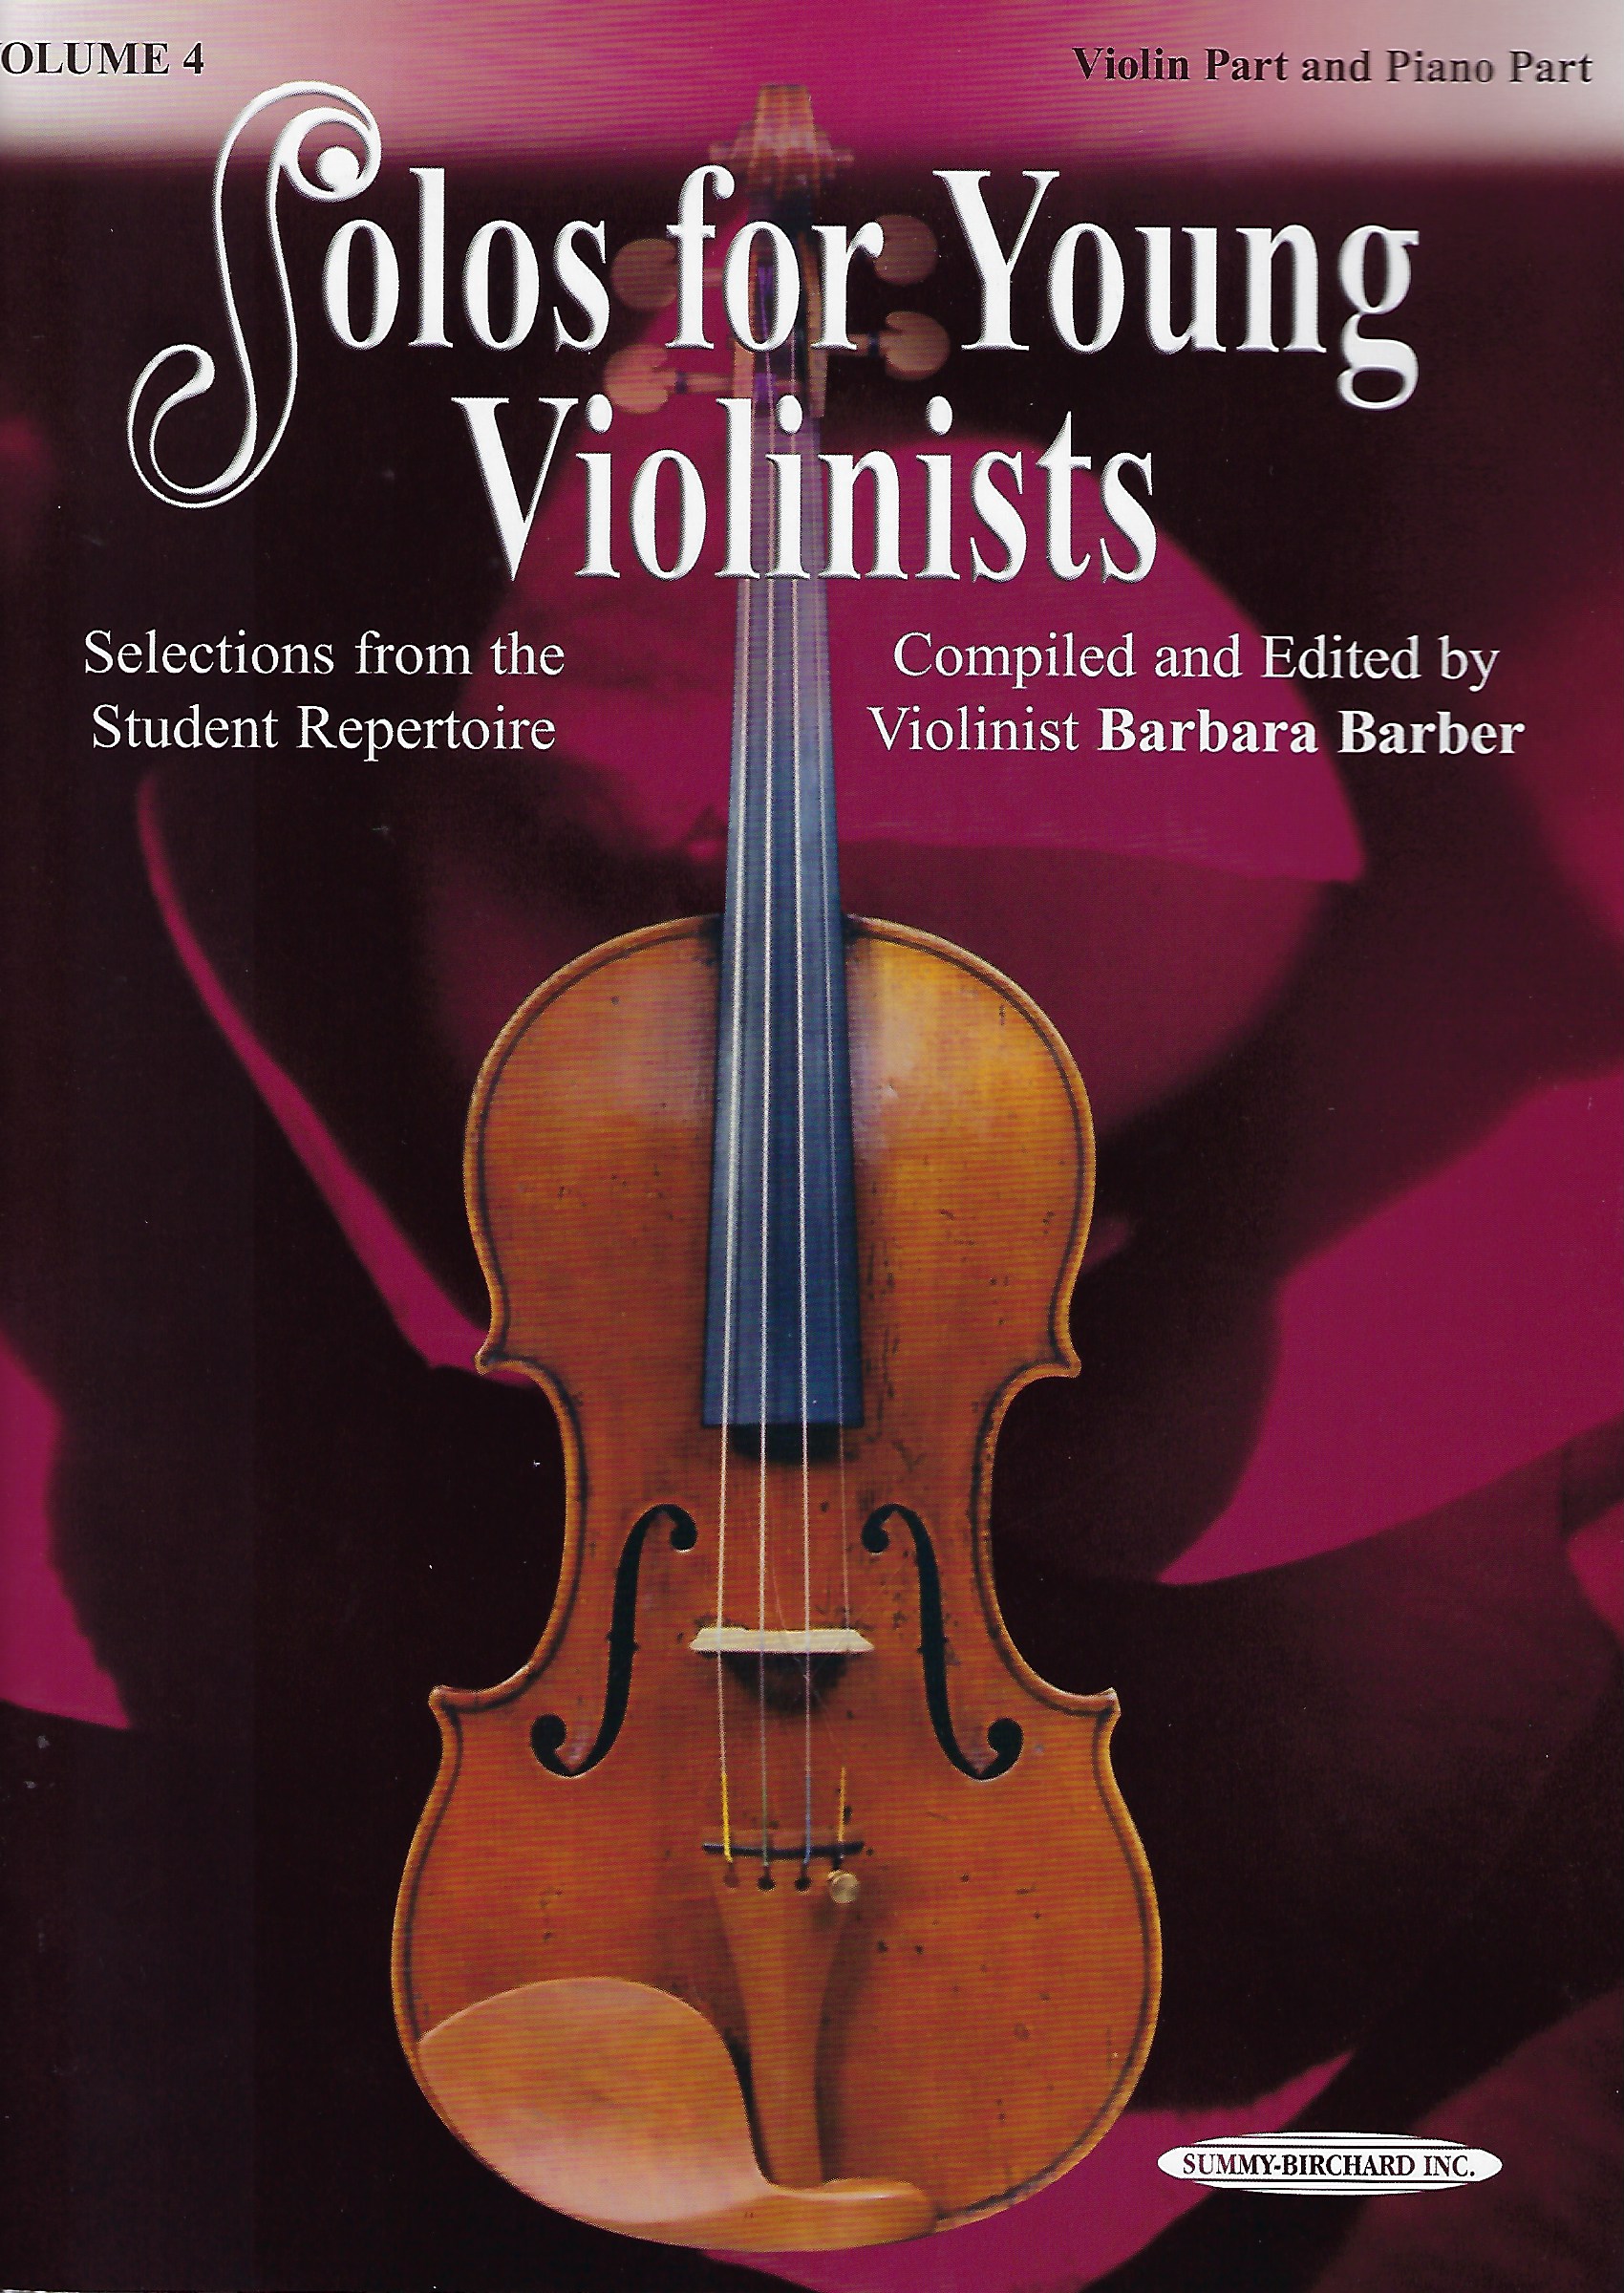 Solos for Young Violinists vol. 4